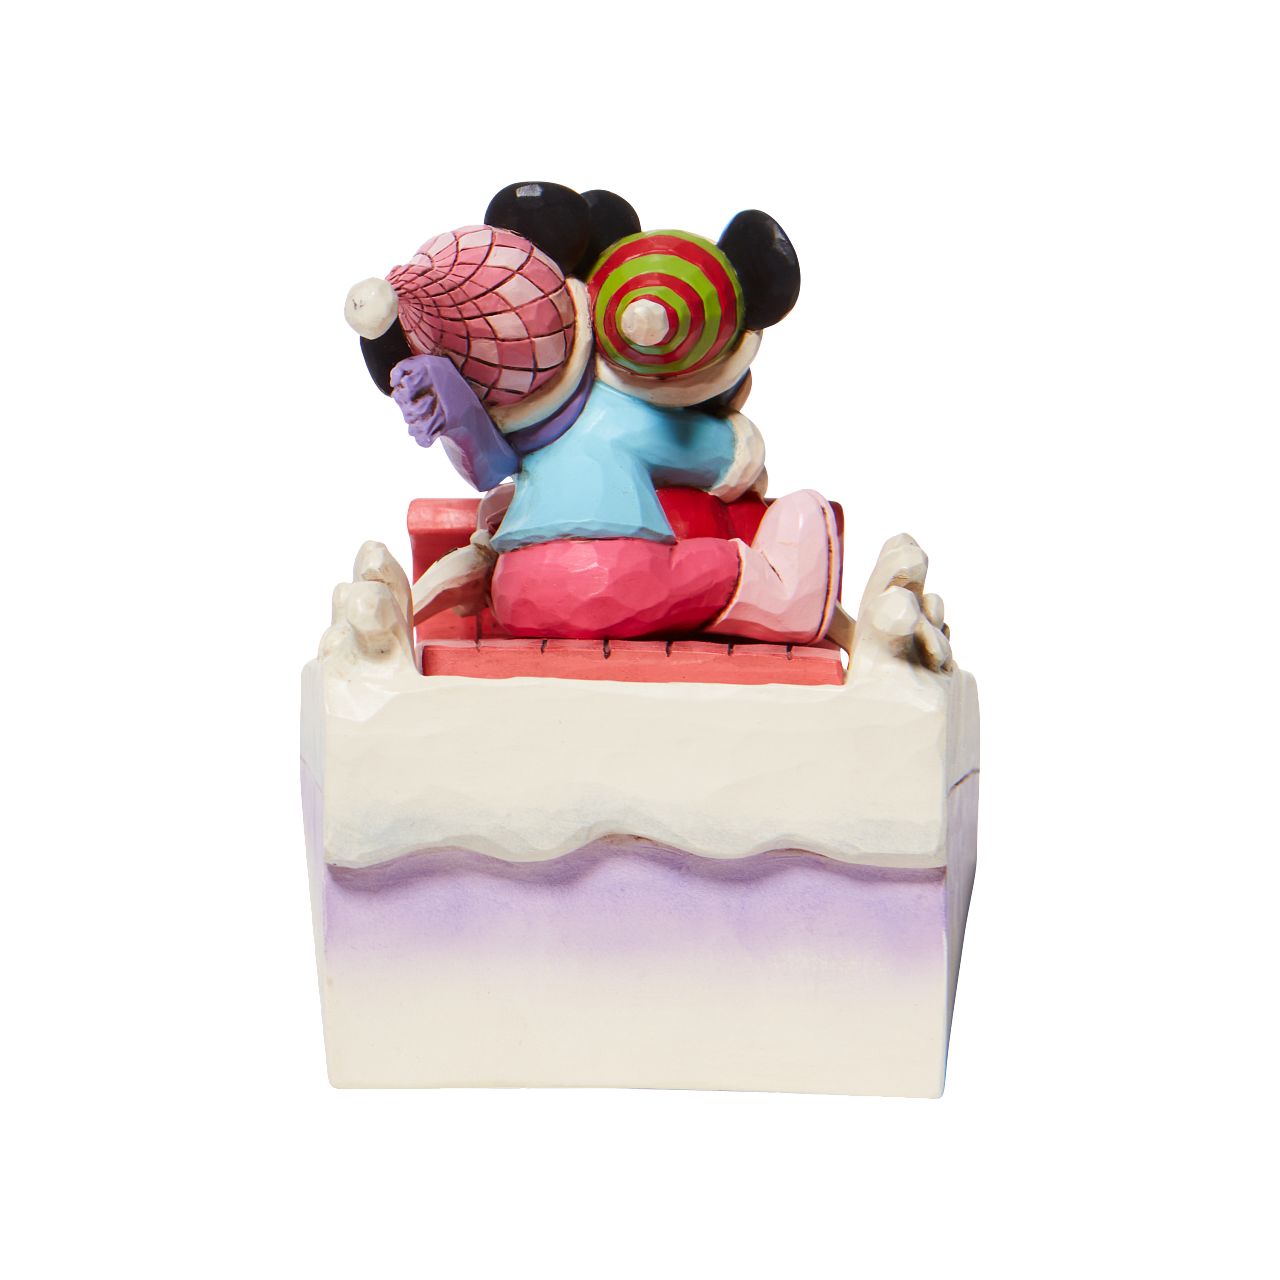 Jim Shore Disney Mickey & Minnie Sledding Figurine - Sledding Sweethearts  Couples that sleigh together, stay together. Disney's original duo embrace for a sled ride down Christmas Mountain. Holding her guy tight, Minnie clings onto Mickey as they go sliding in the snow. With folksy Jim Shore details they're a jolly pair. Hand painted and hand sculpted from cast stone.